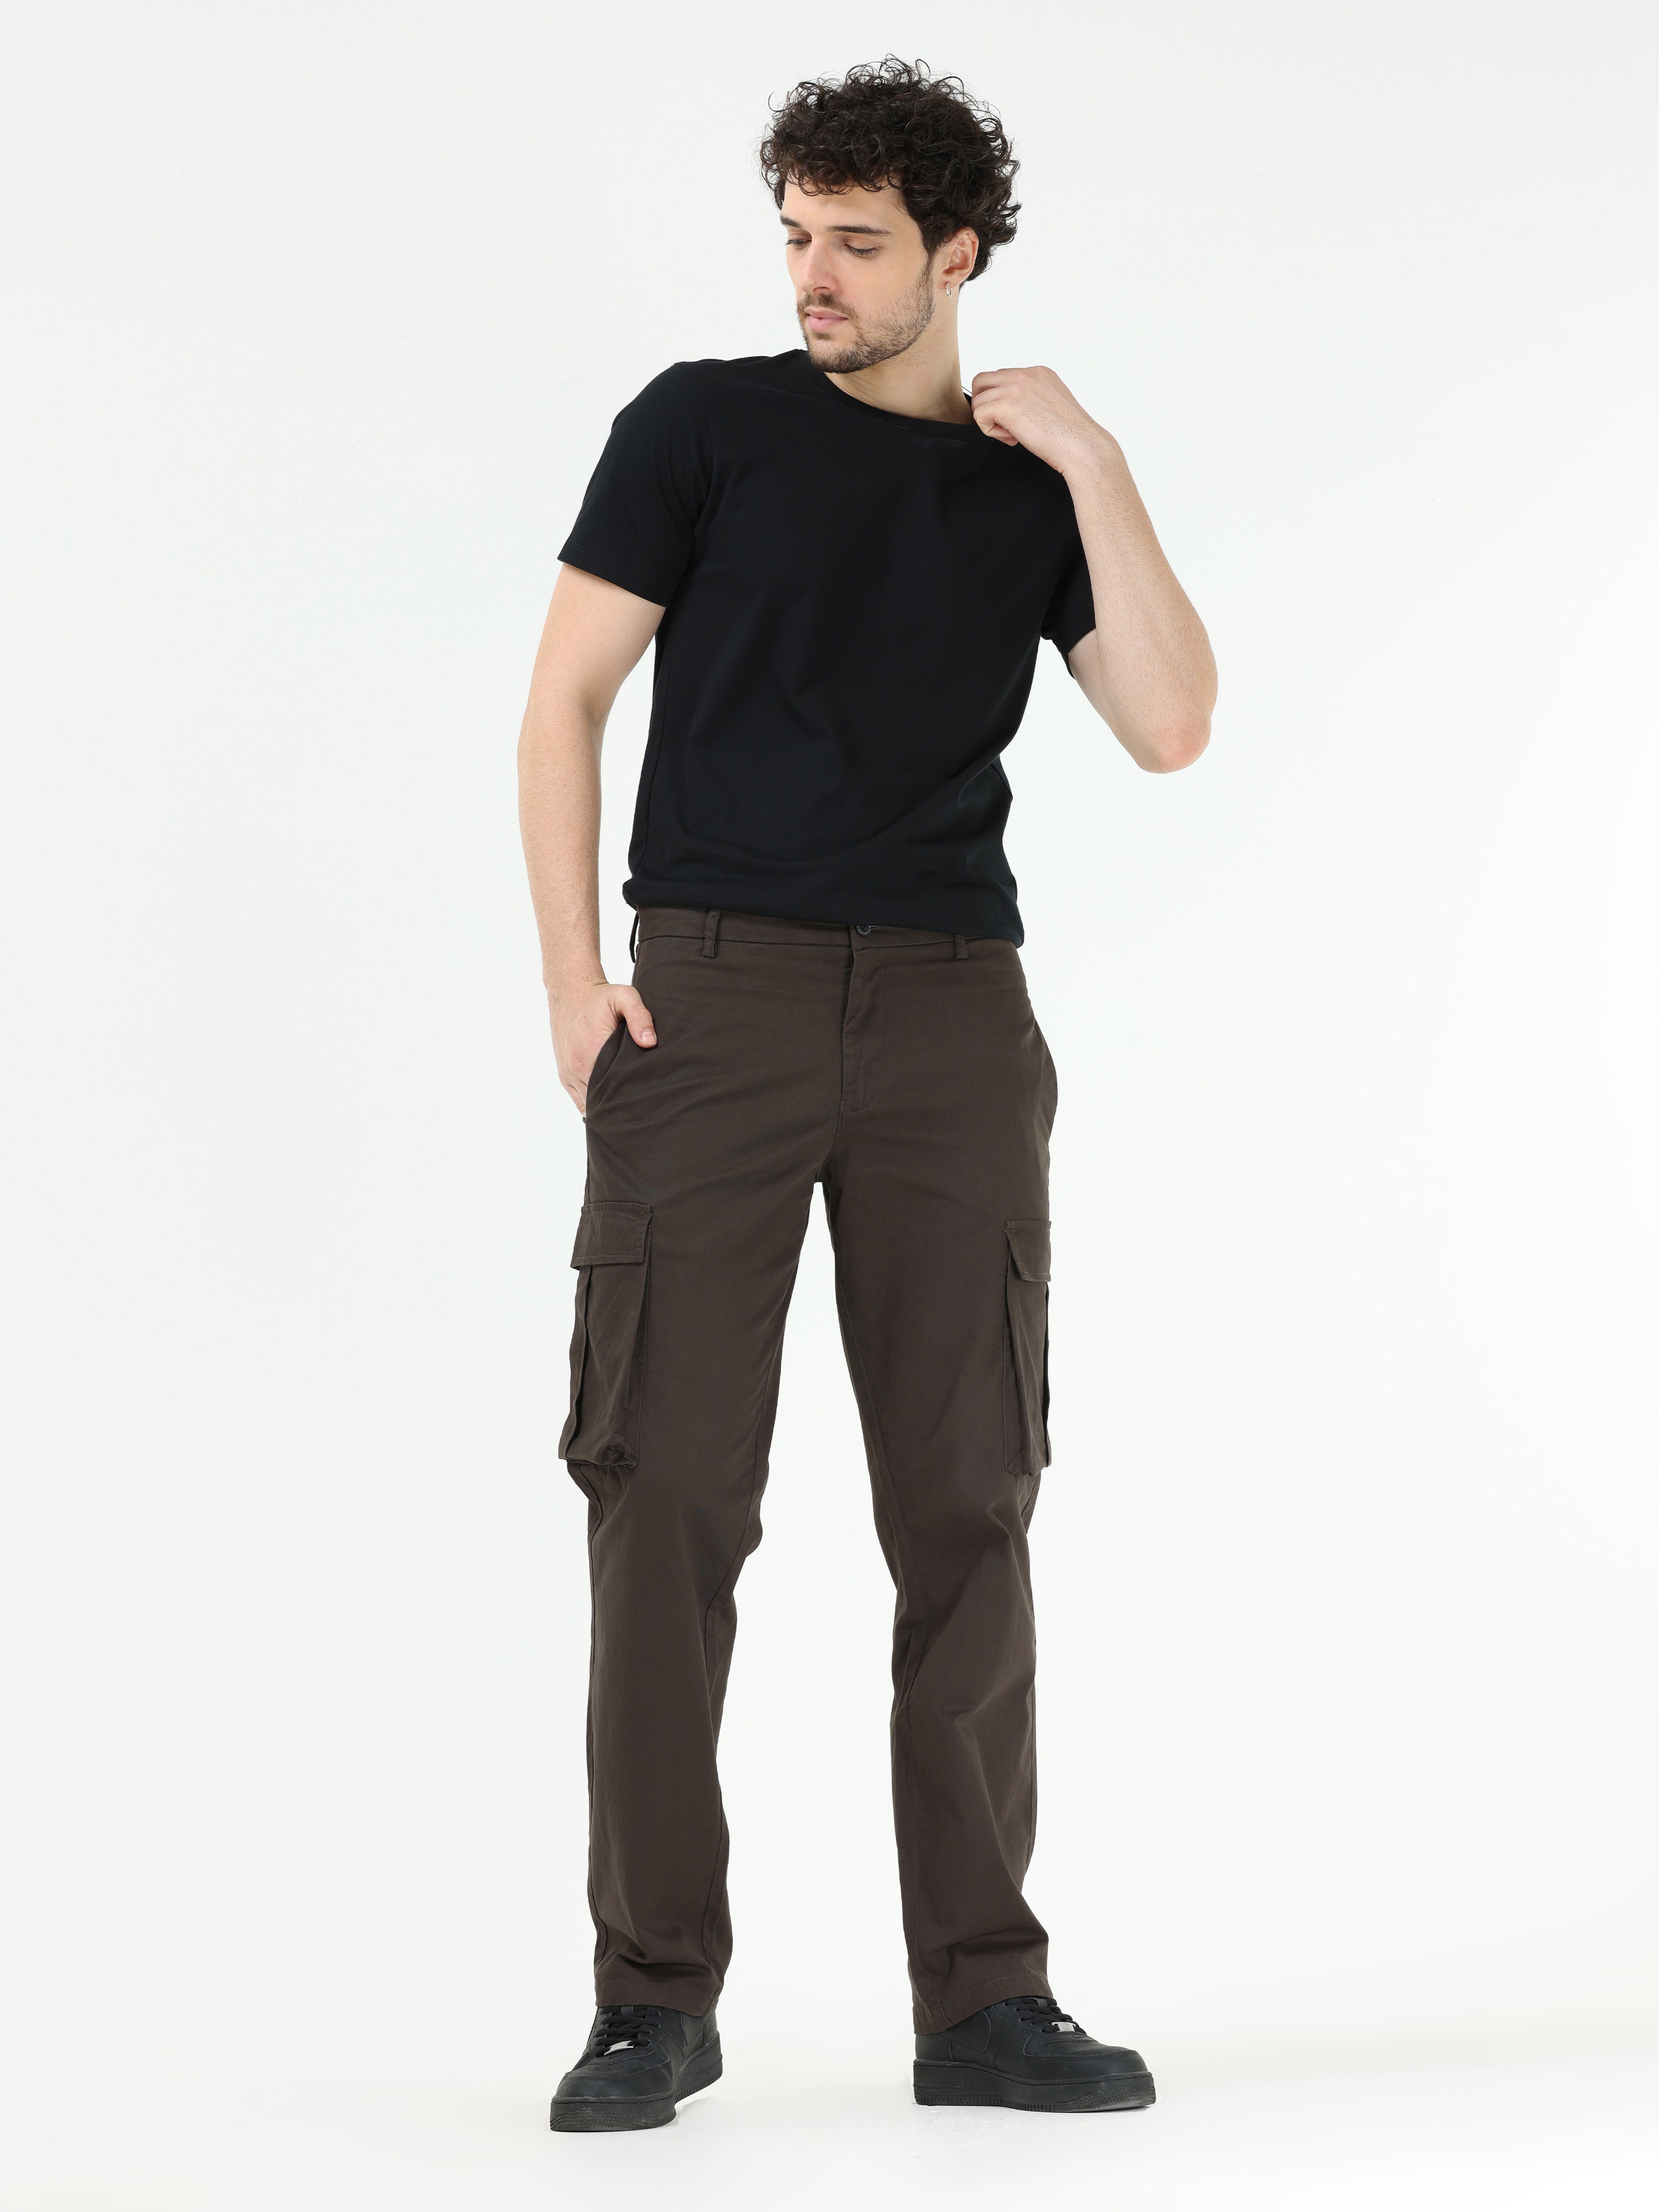 Finest Twill Dark Olive Baggy Fit Cargo